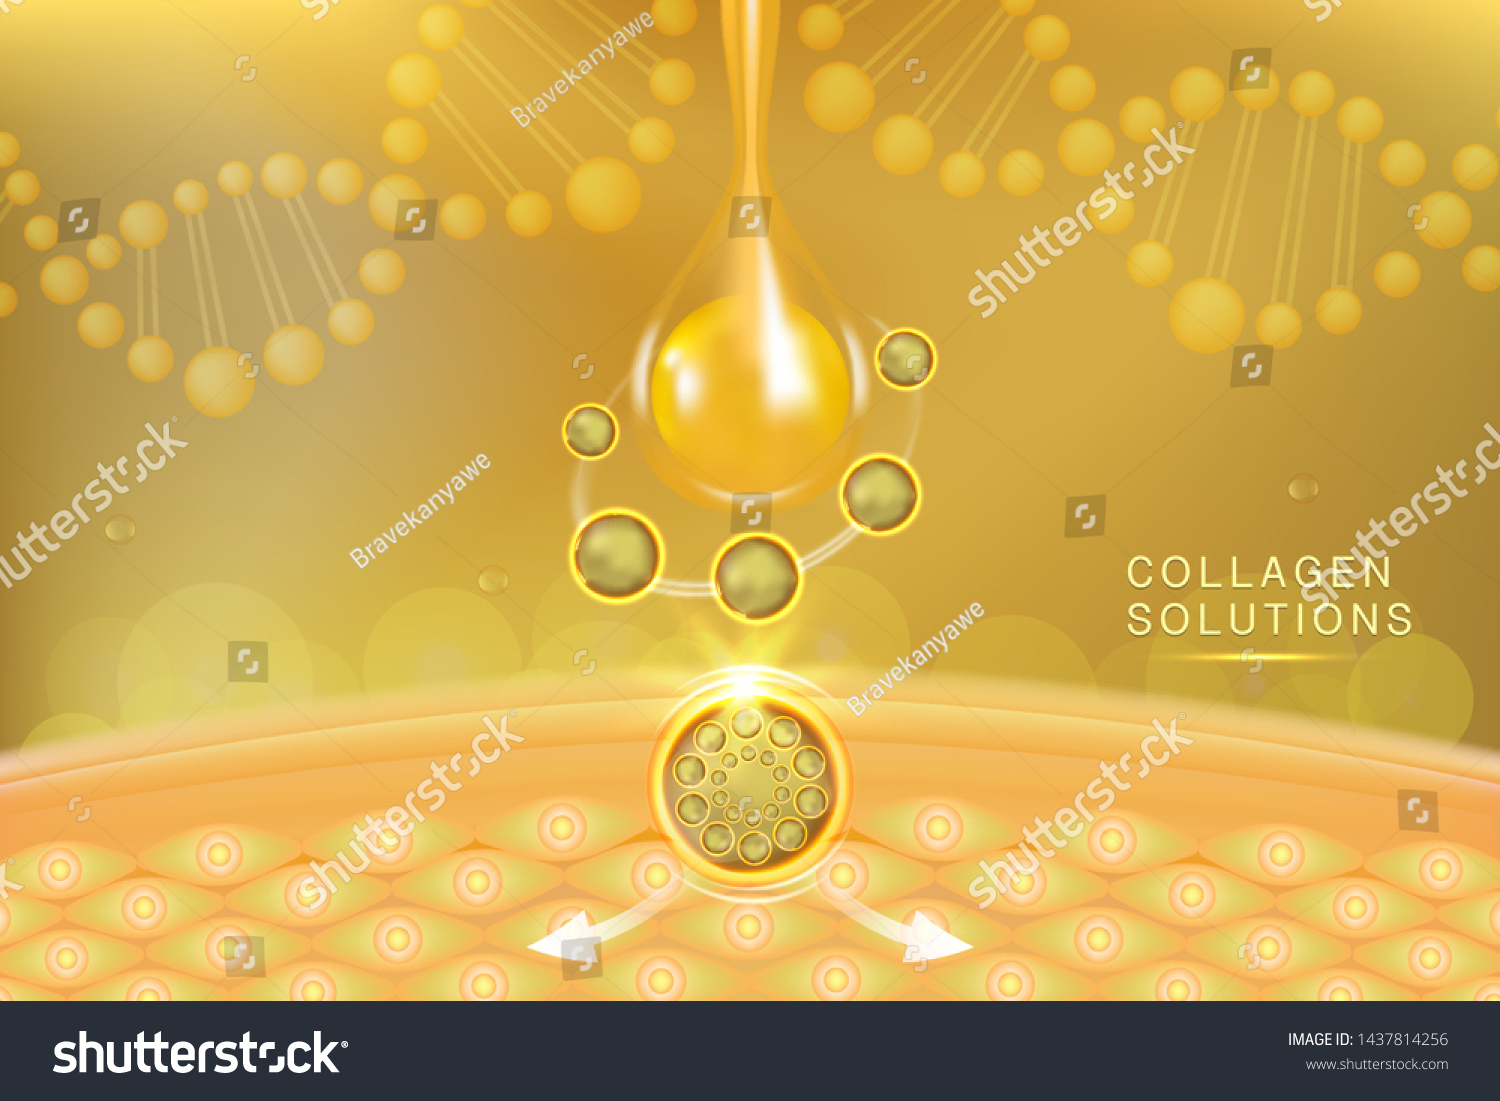 Hyaluronic acid skin solutions ad, gold collagen serum drop with cosmetic advertising background ready to use, illustration vector. #1437814256